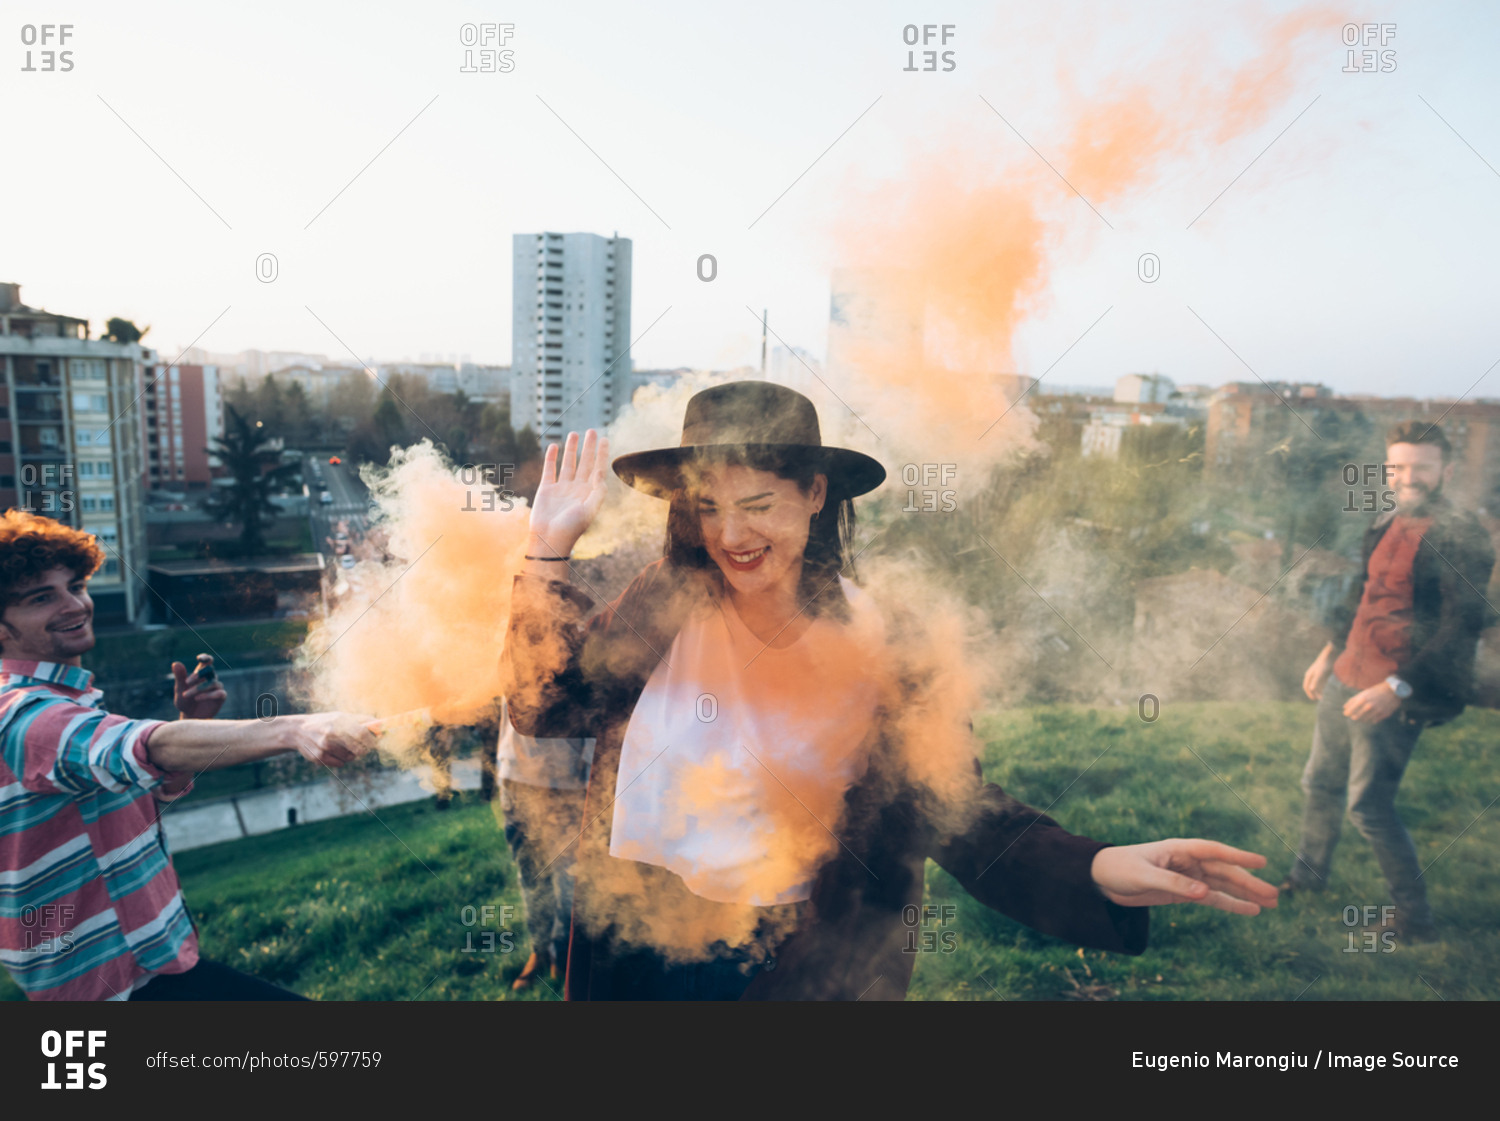 Group of friends on roof, holding colorful smoke flares, young woman walking through orange smoke